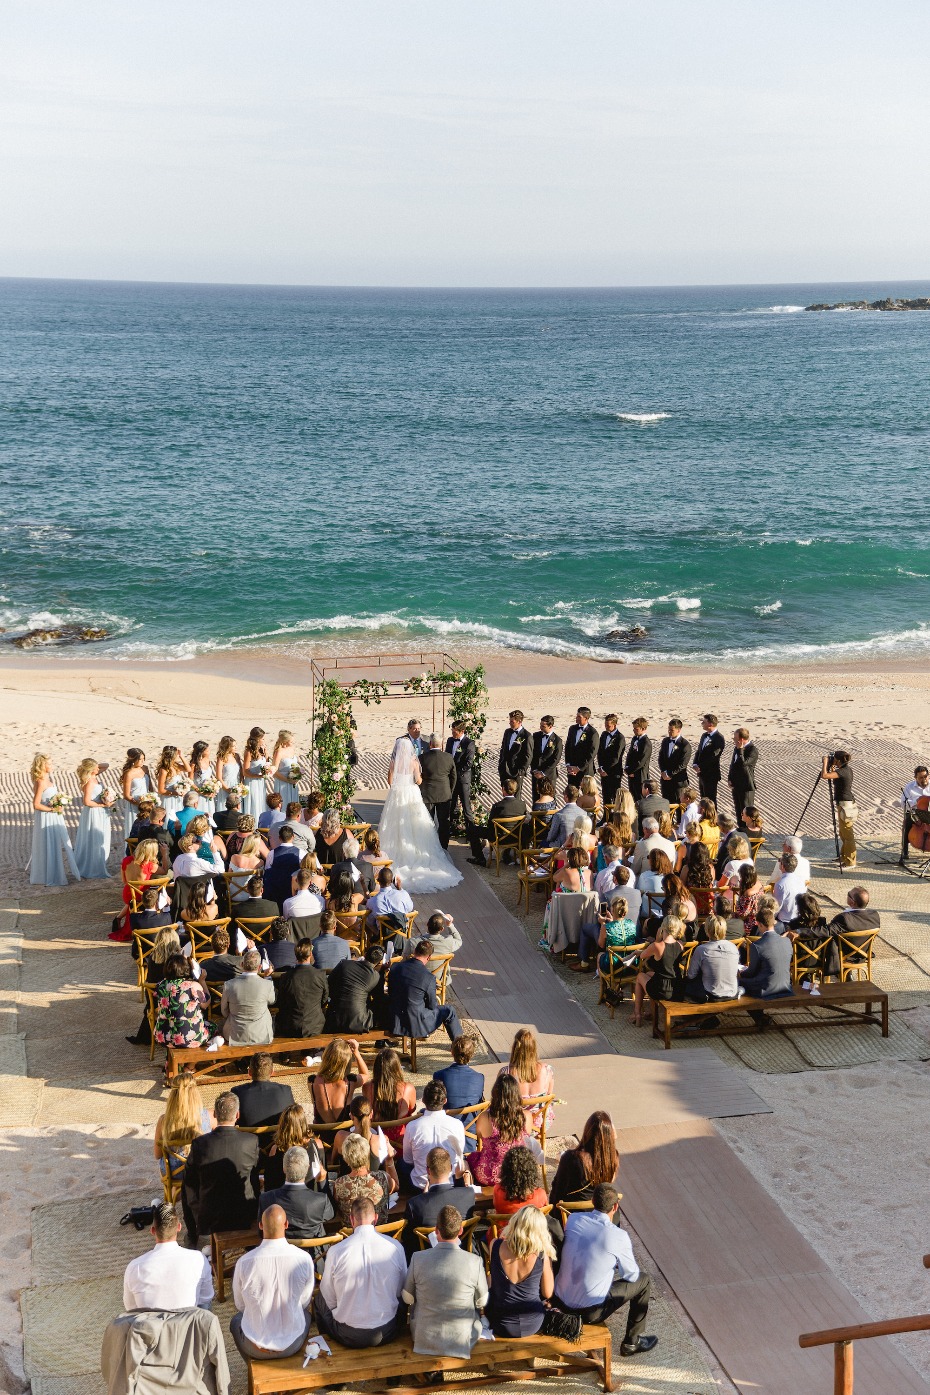 Gorgeous ocean front wedding in Mexico